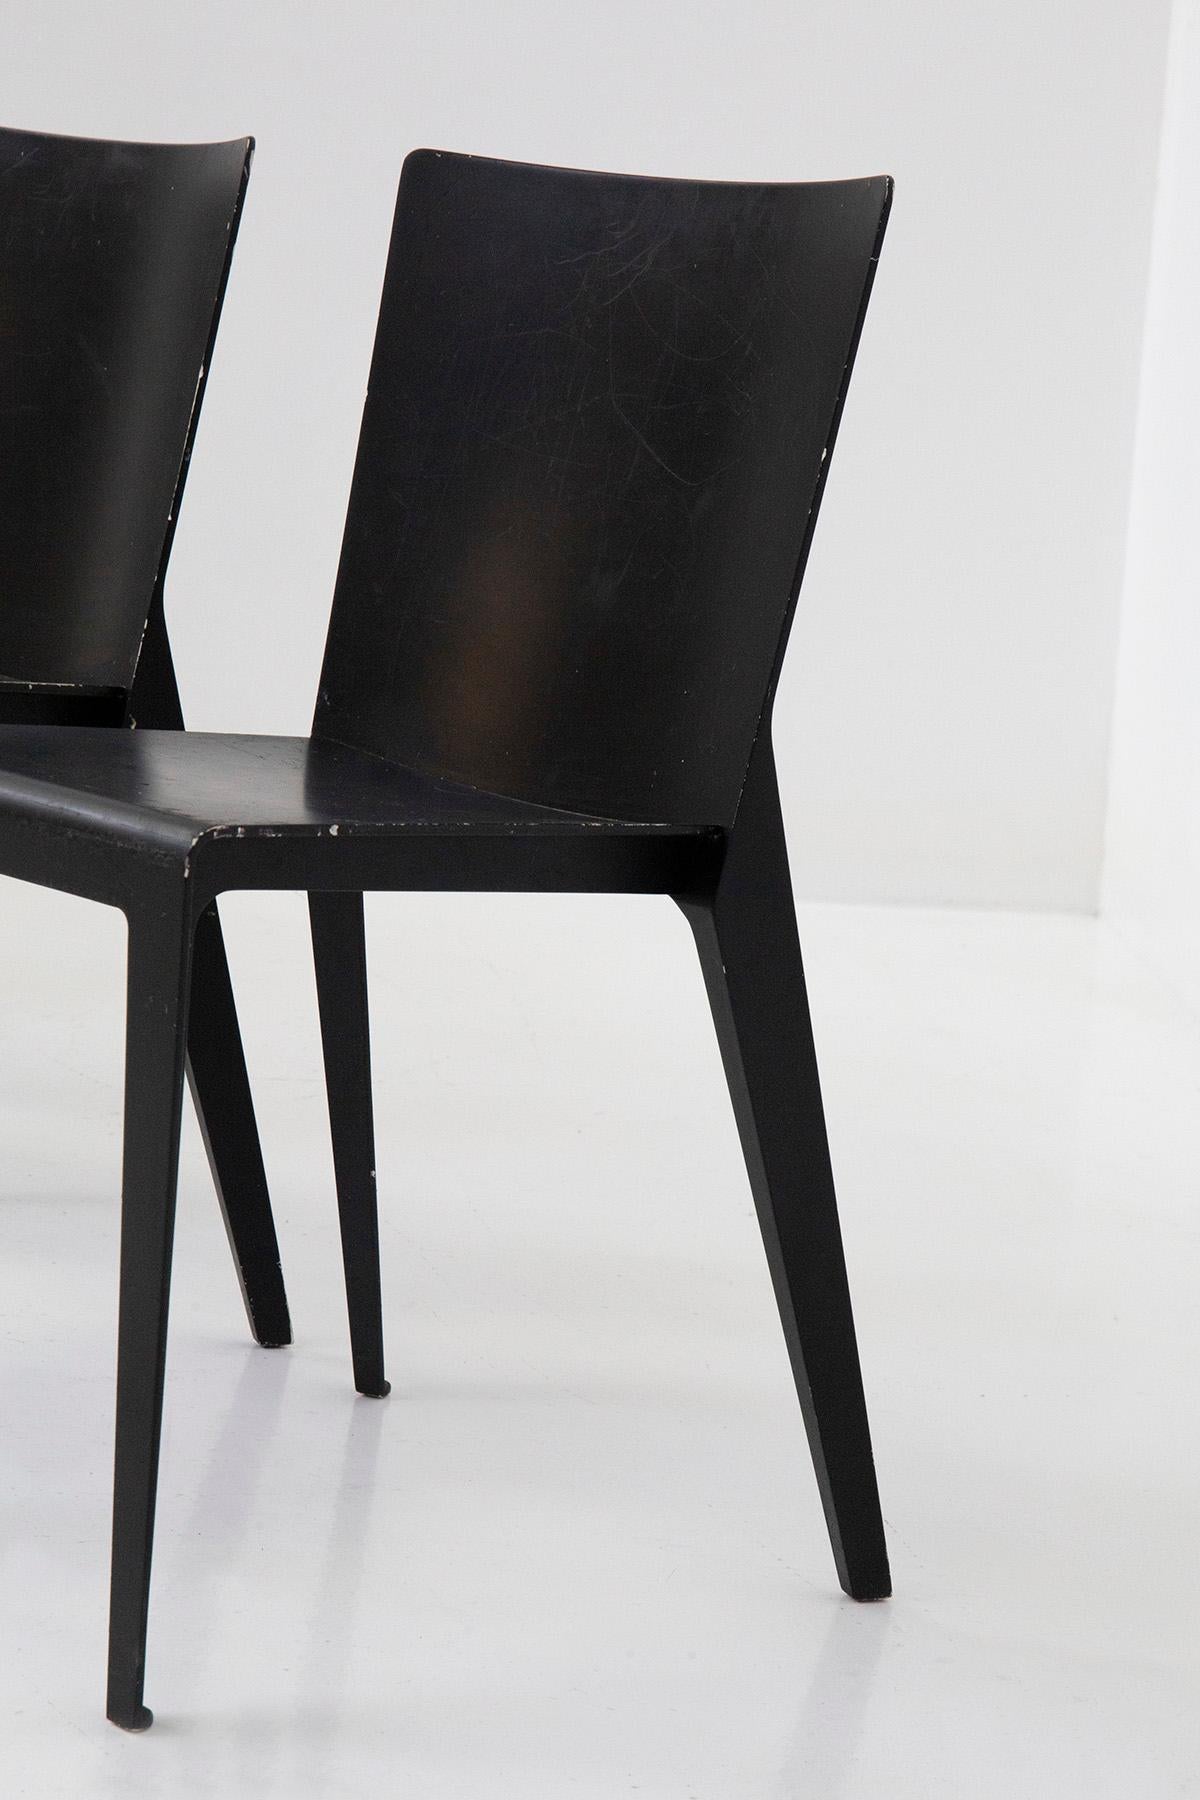 Contemporary Molteni Chairs Set of Five Model Alfa by Hannes Wettstein For Sale